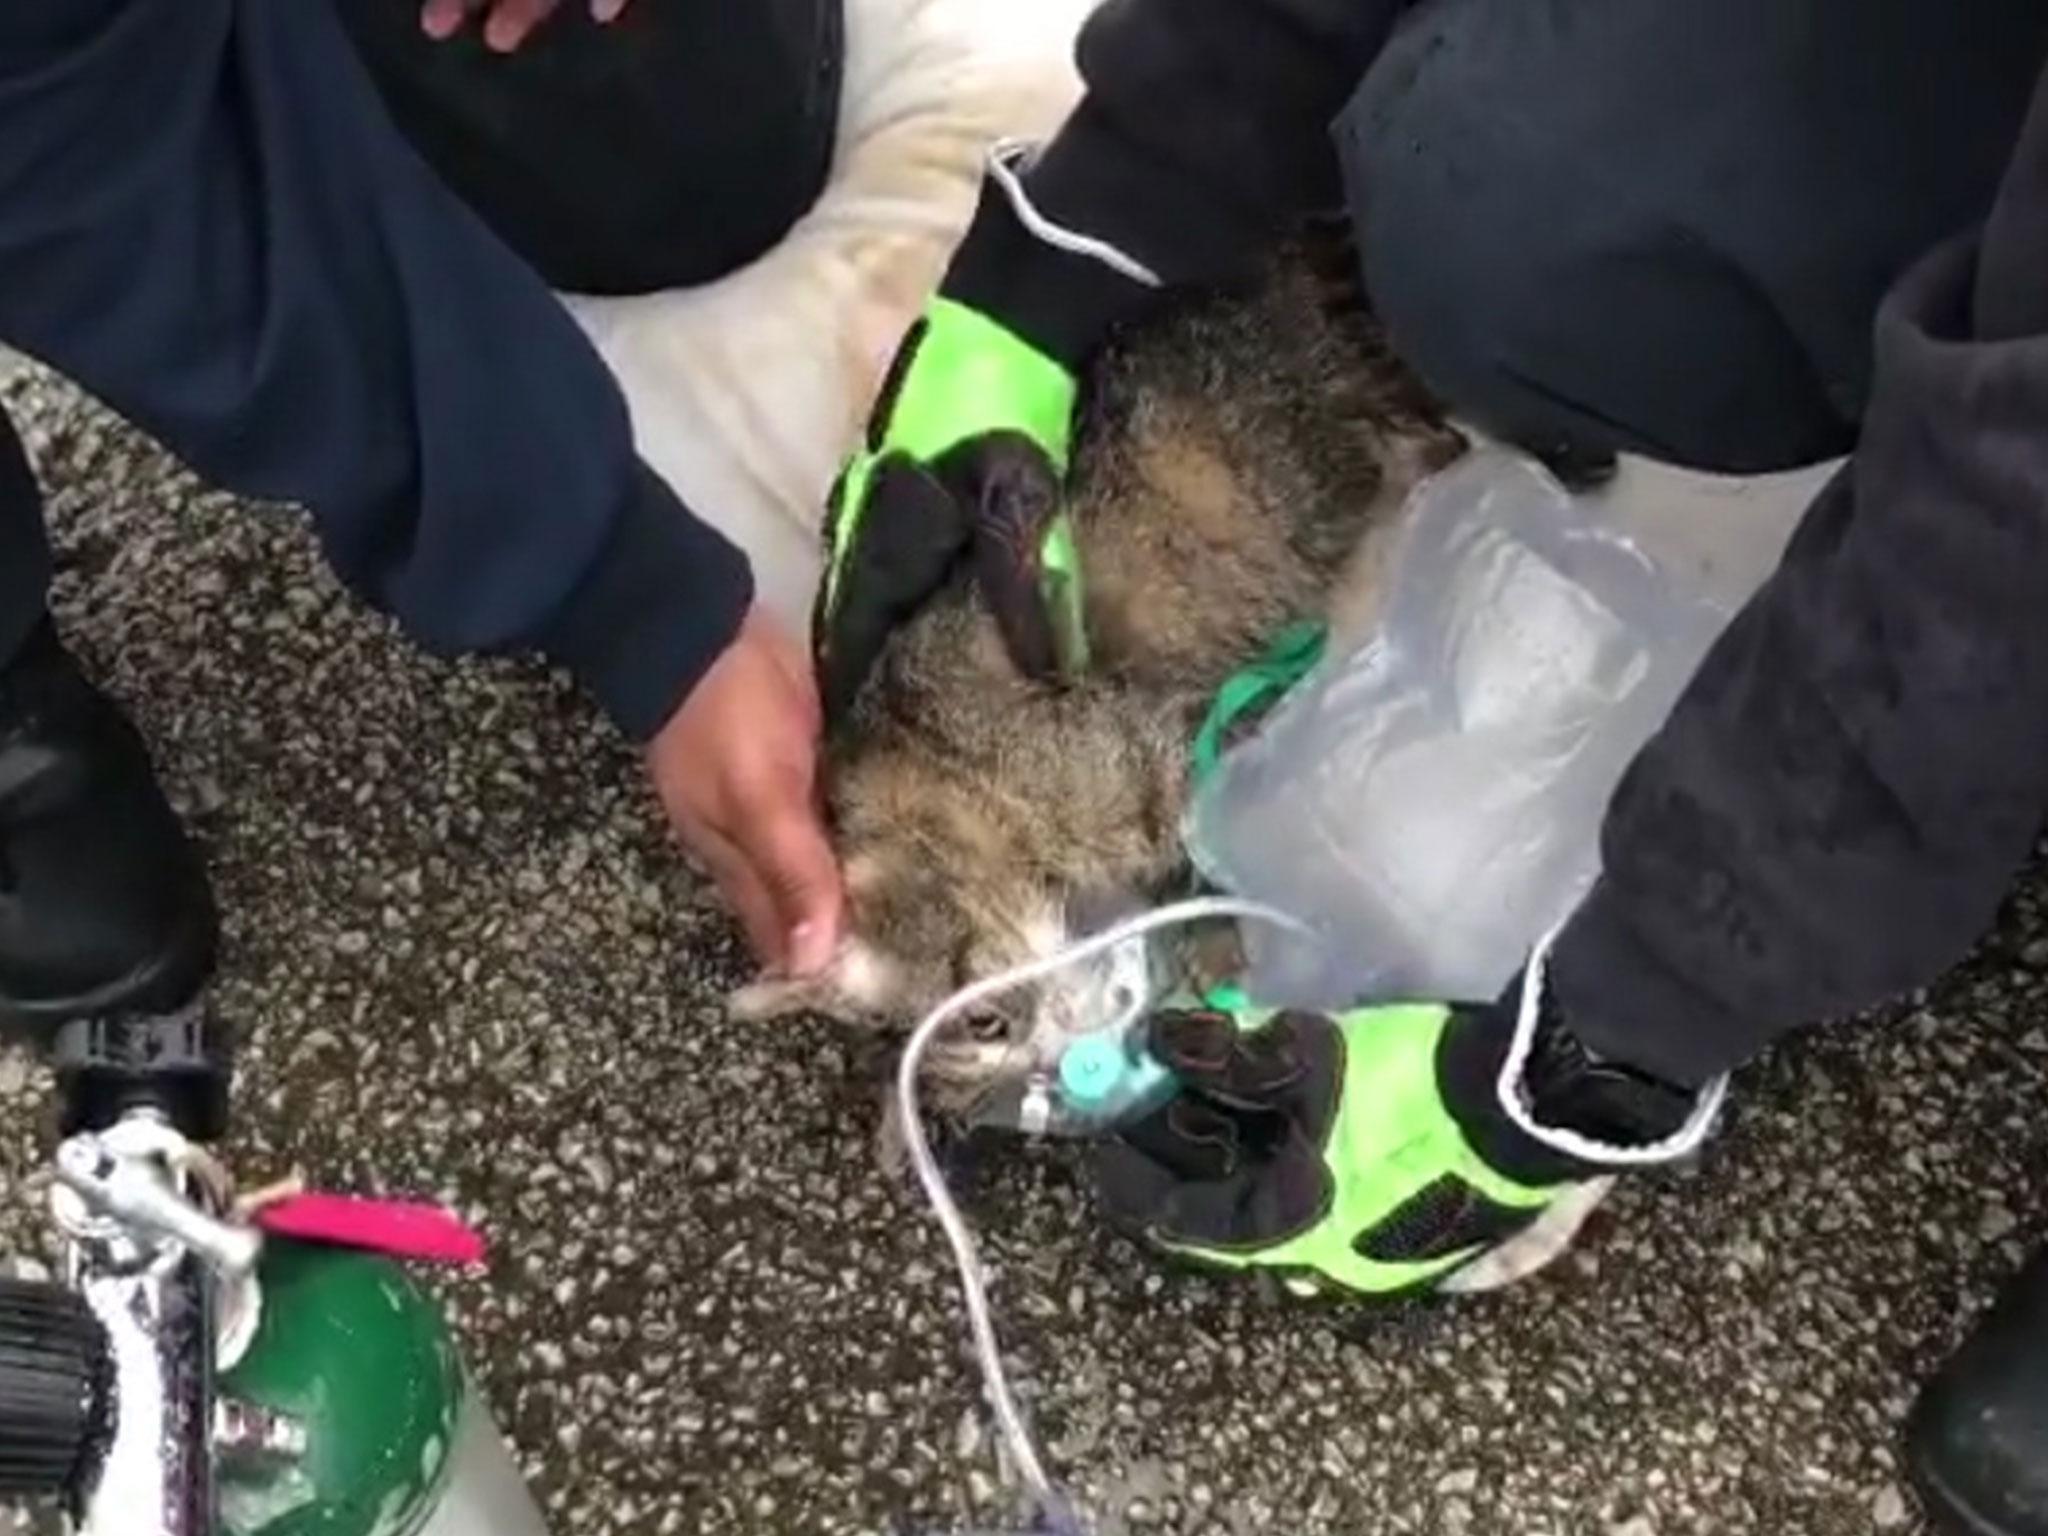 Firefighters use oxygen mask to resuscitate cat found in burning building